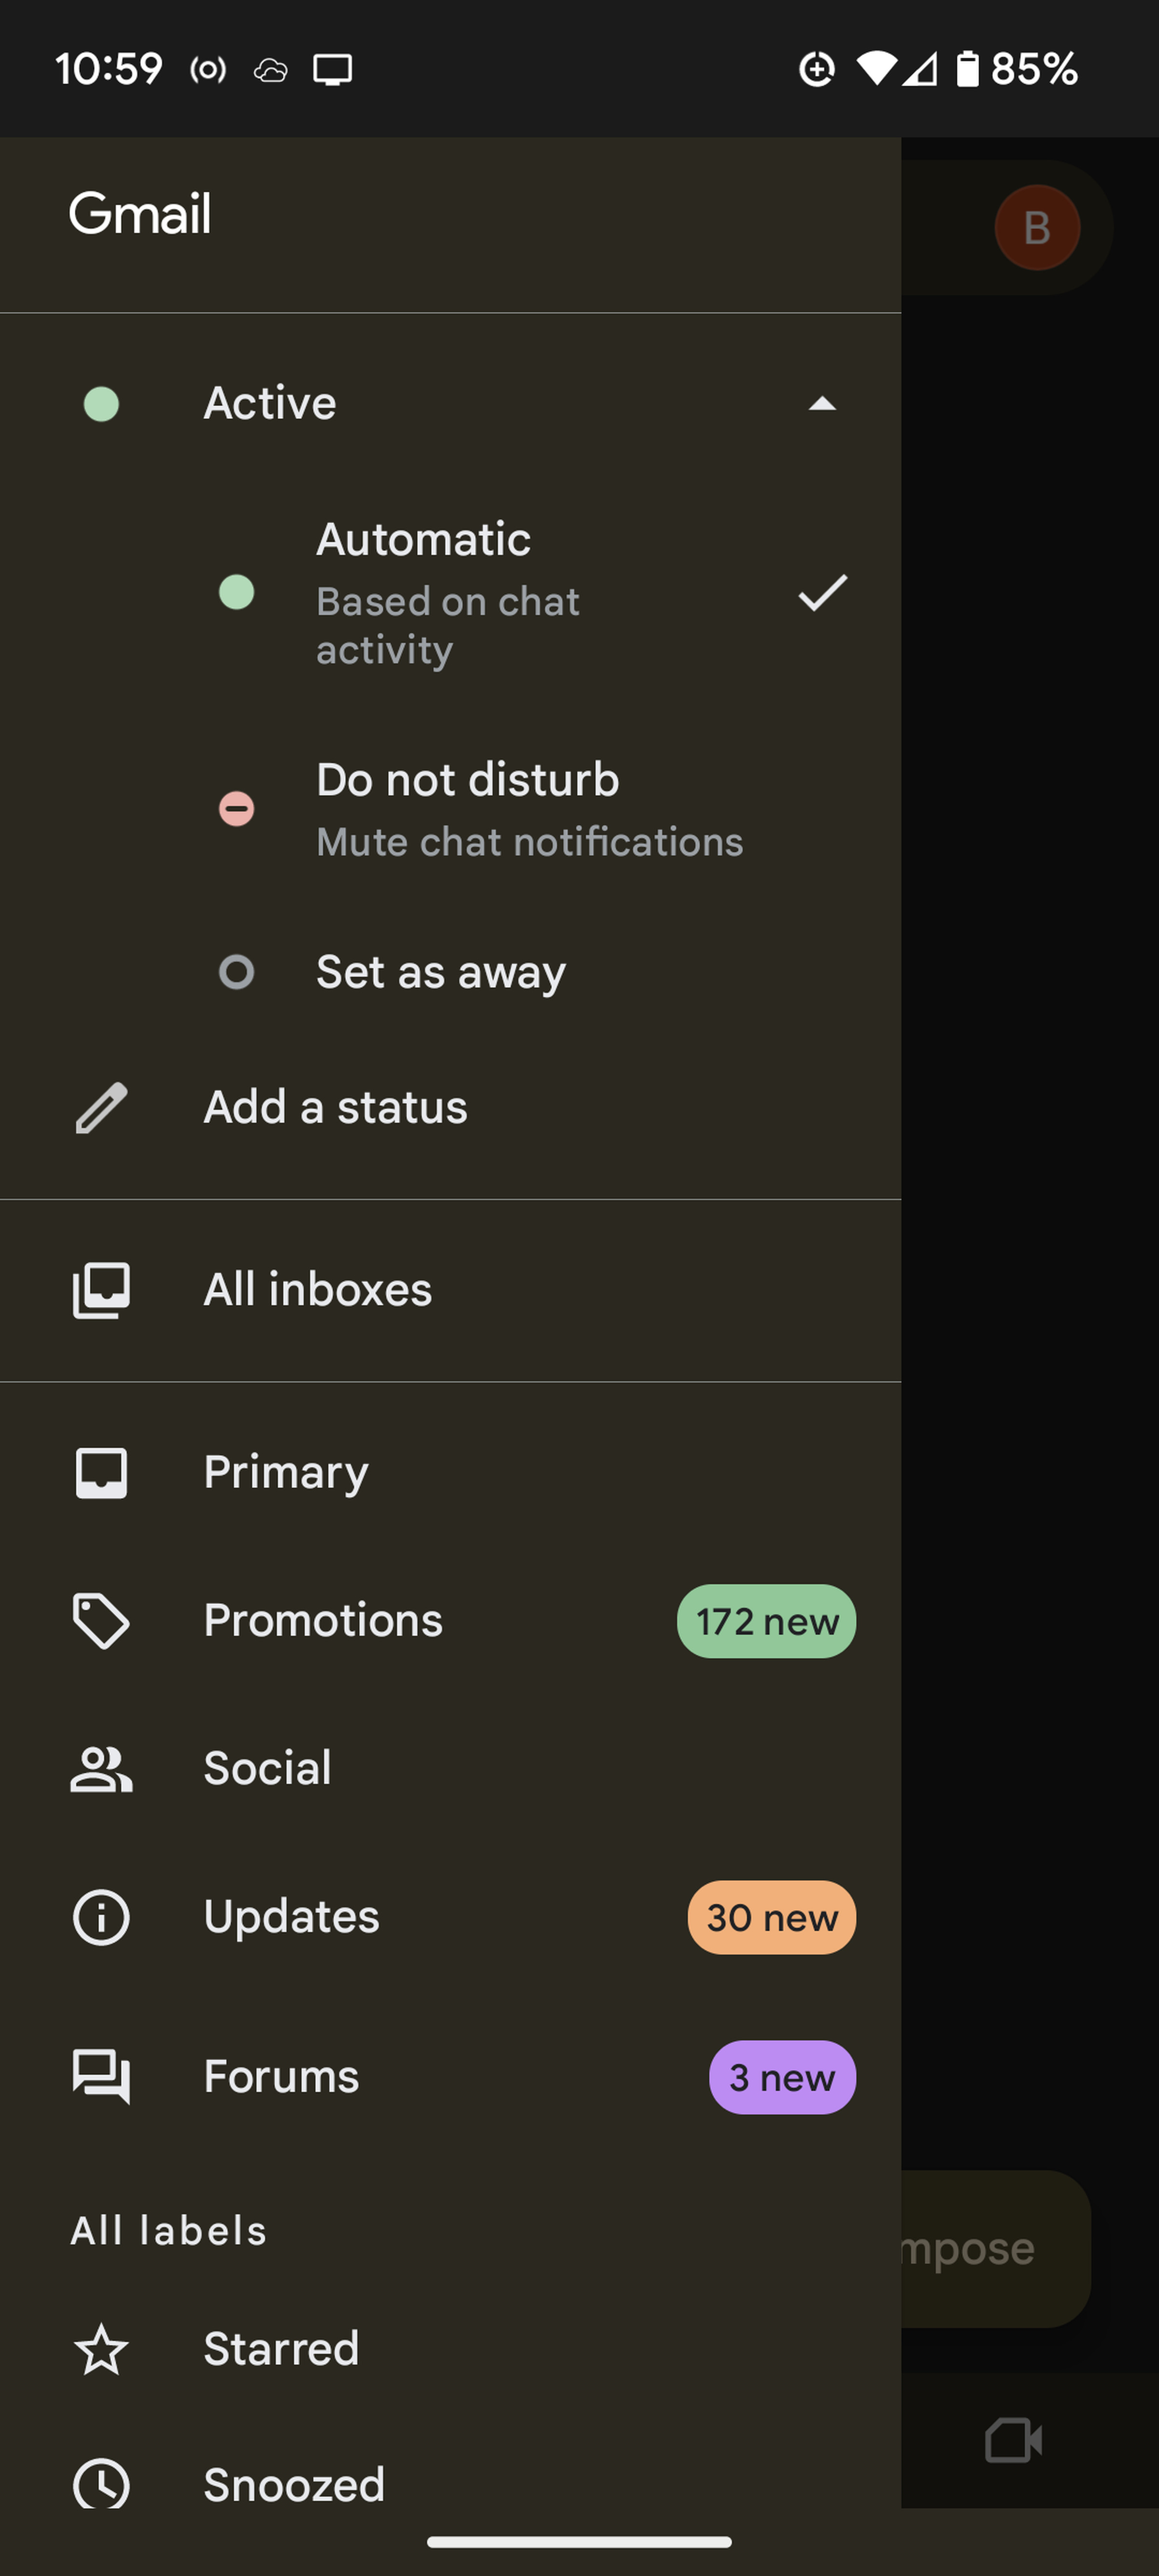 Side menu in Gmail with Active on top, Automatic, Do not disturb and Set as away beneath it, and other menu choices beneath that